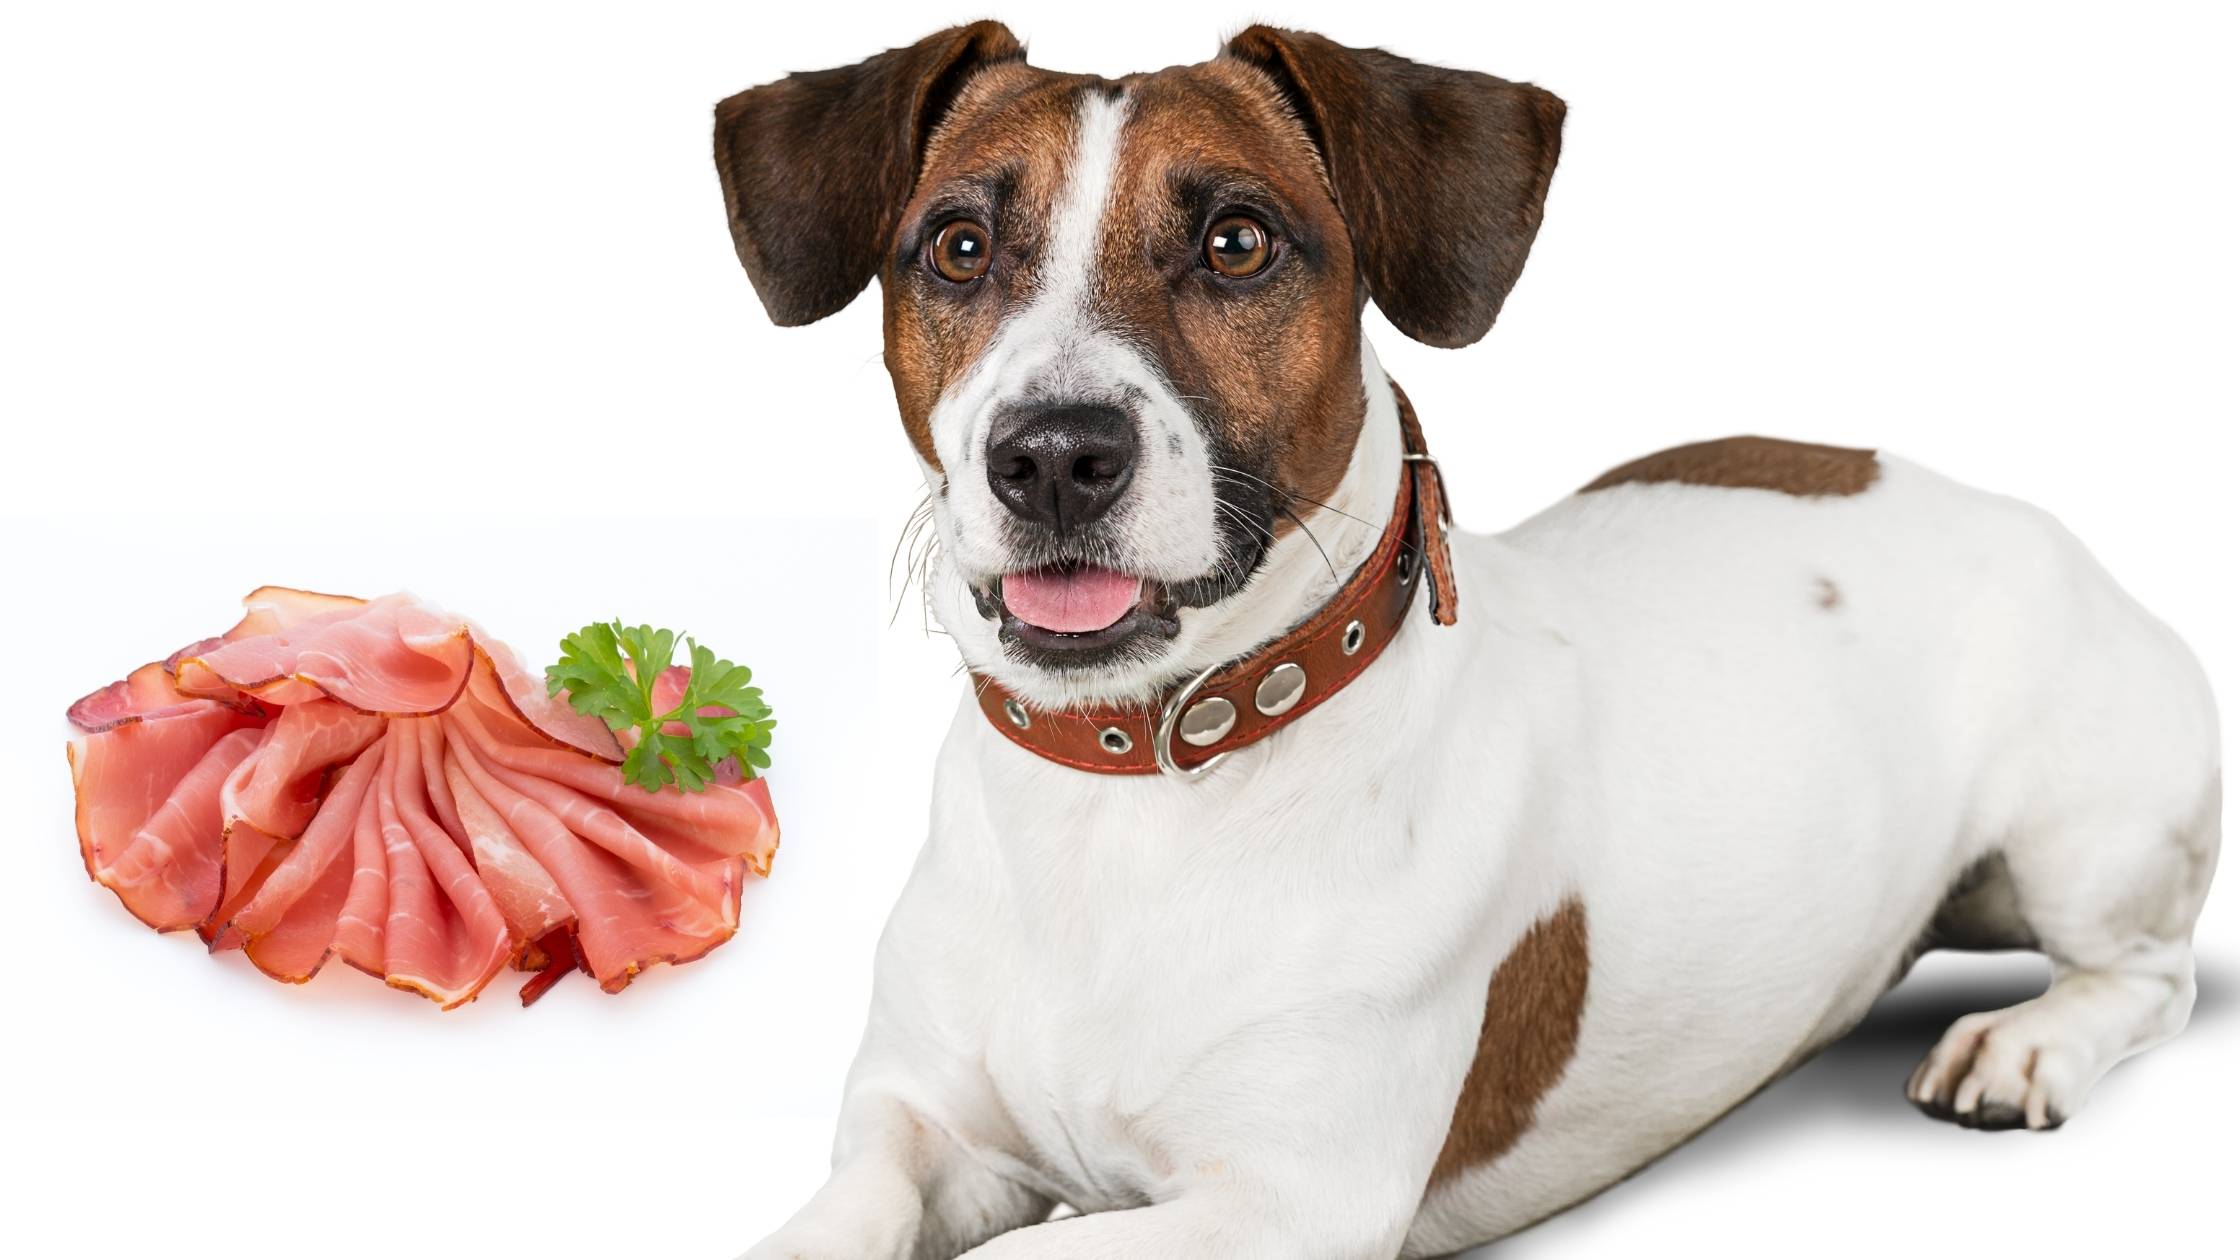 Can Dogs Eat Lunch Meat